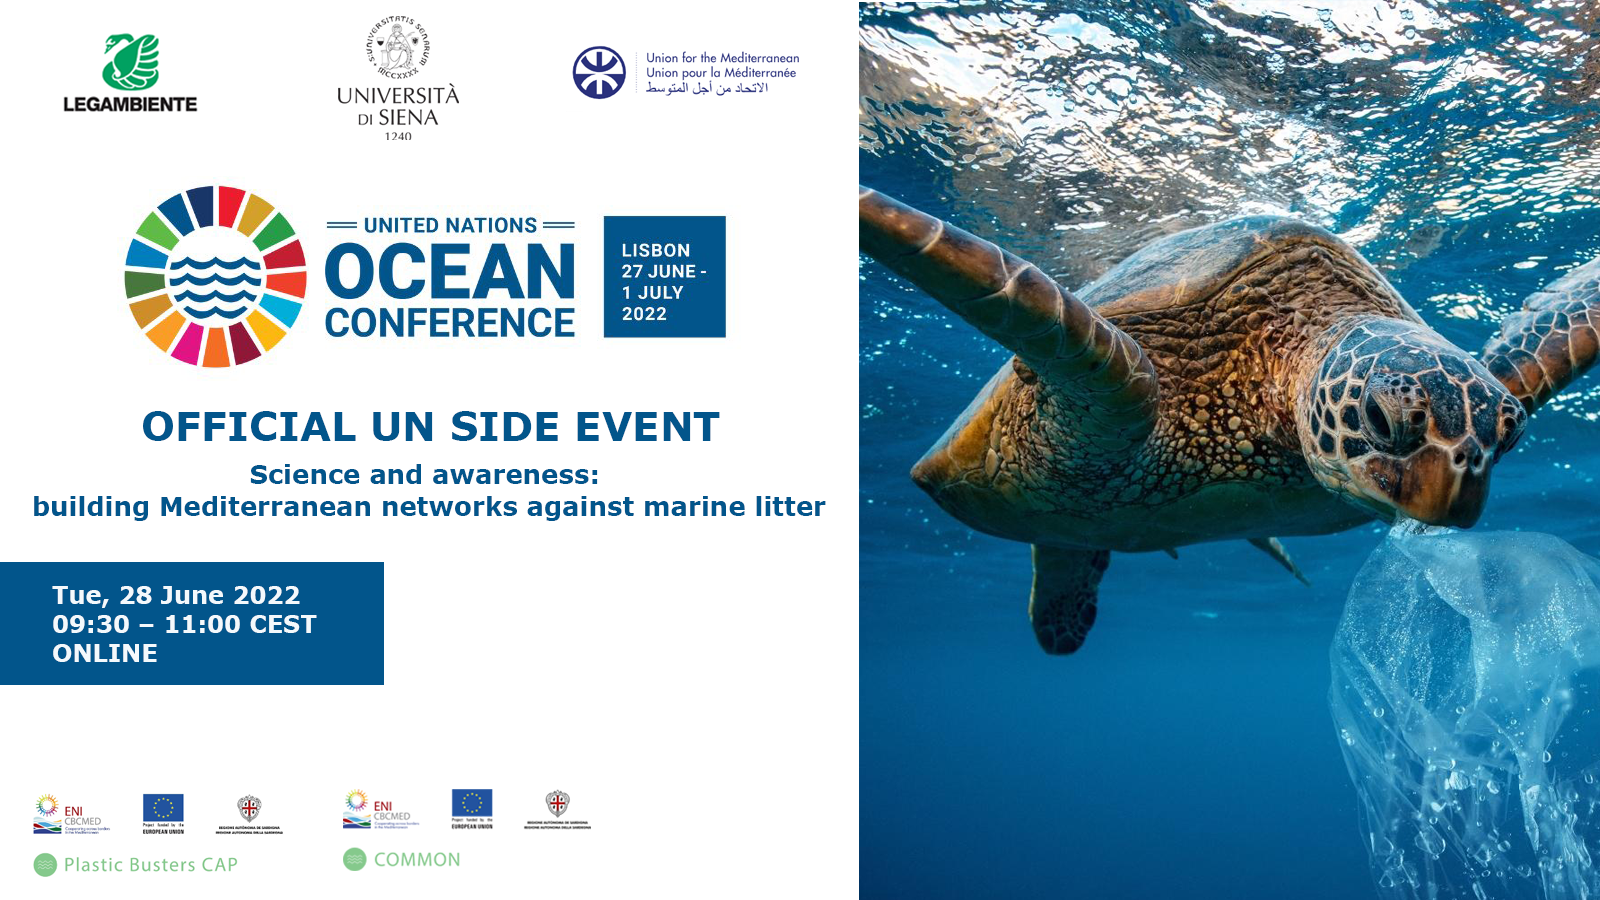 UN Ocean Conference: Legambiente, LB of the COMMON project, and the University of Siena together to protect the Mediterranean Sea